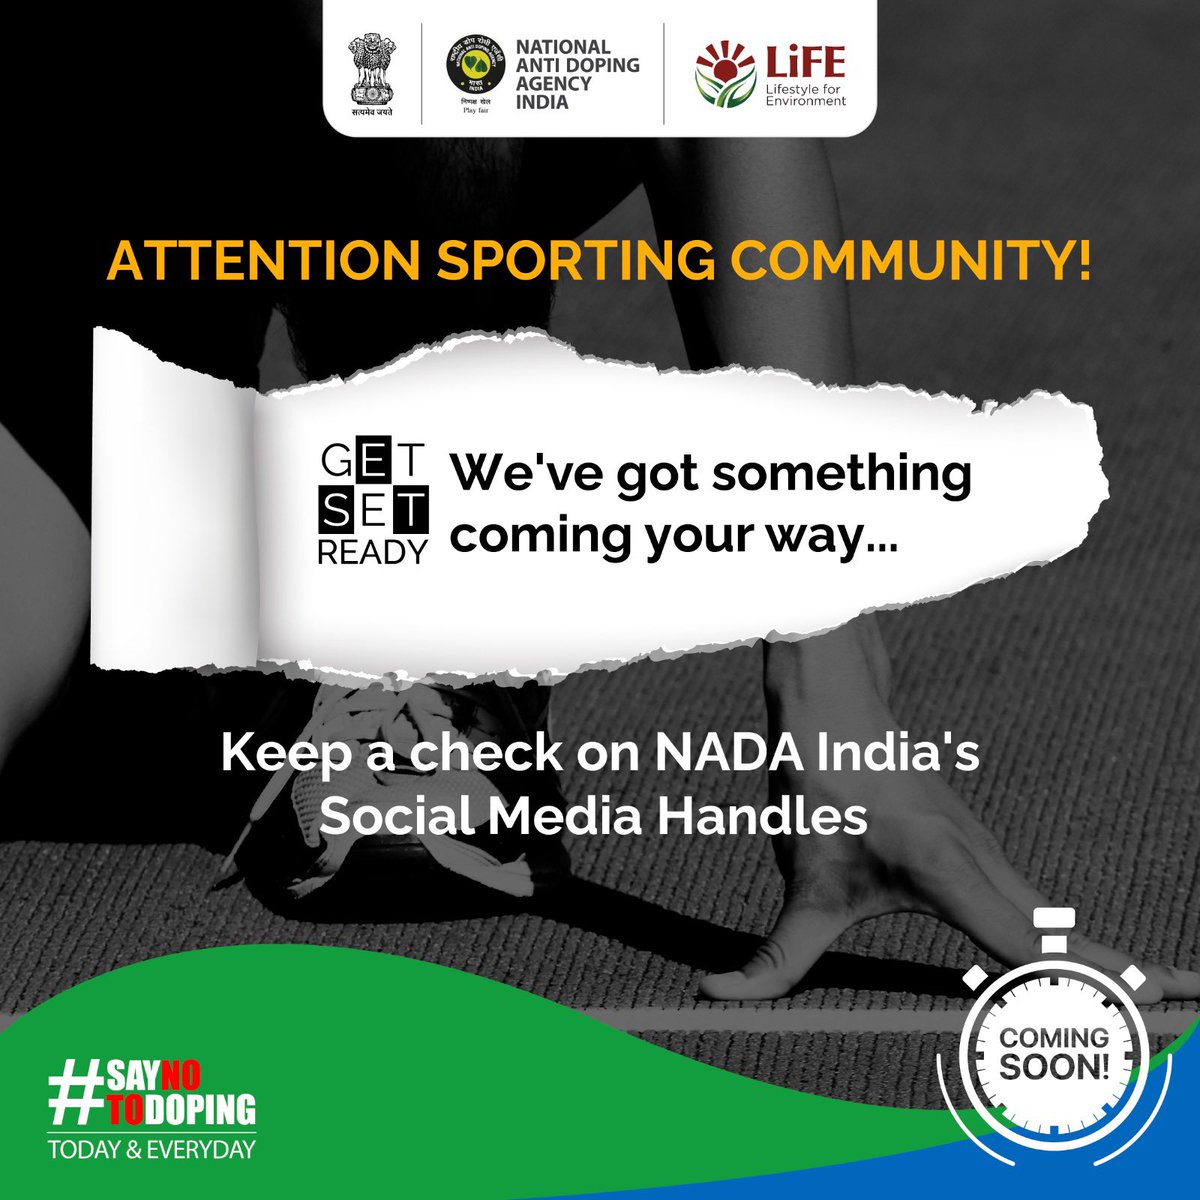 Get ready to ignite your curiosity with NADA India’s upcoming campaign! 

Stay tuned...

#paris #olympics #sports #games #athletes #PlayFair #CleanSport #NoDoping #PlayTrue #SayNoToDoping #SpeakUpAgainstDoping #Win4Real #UnitedbyValues